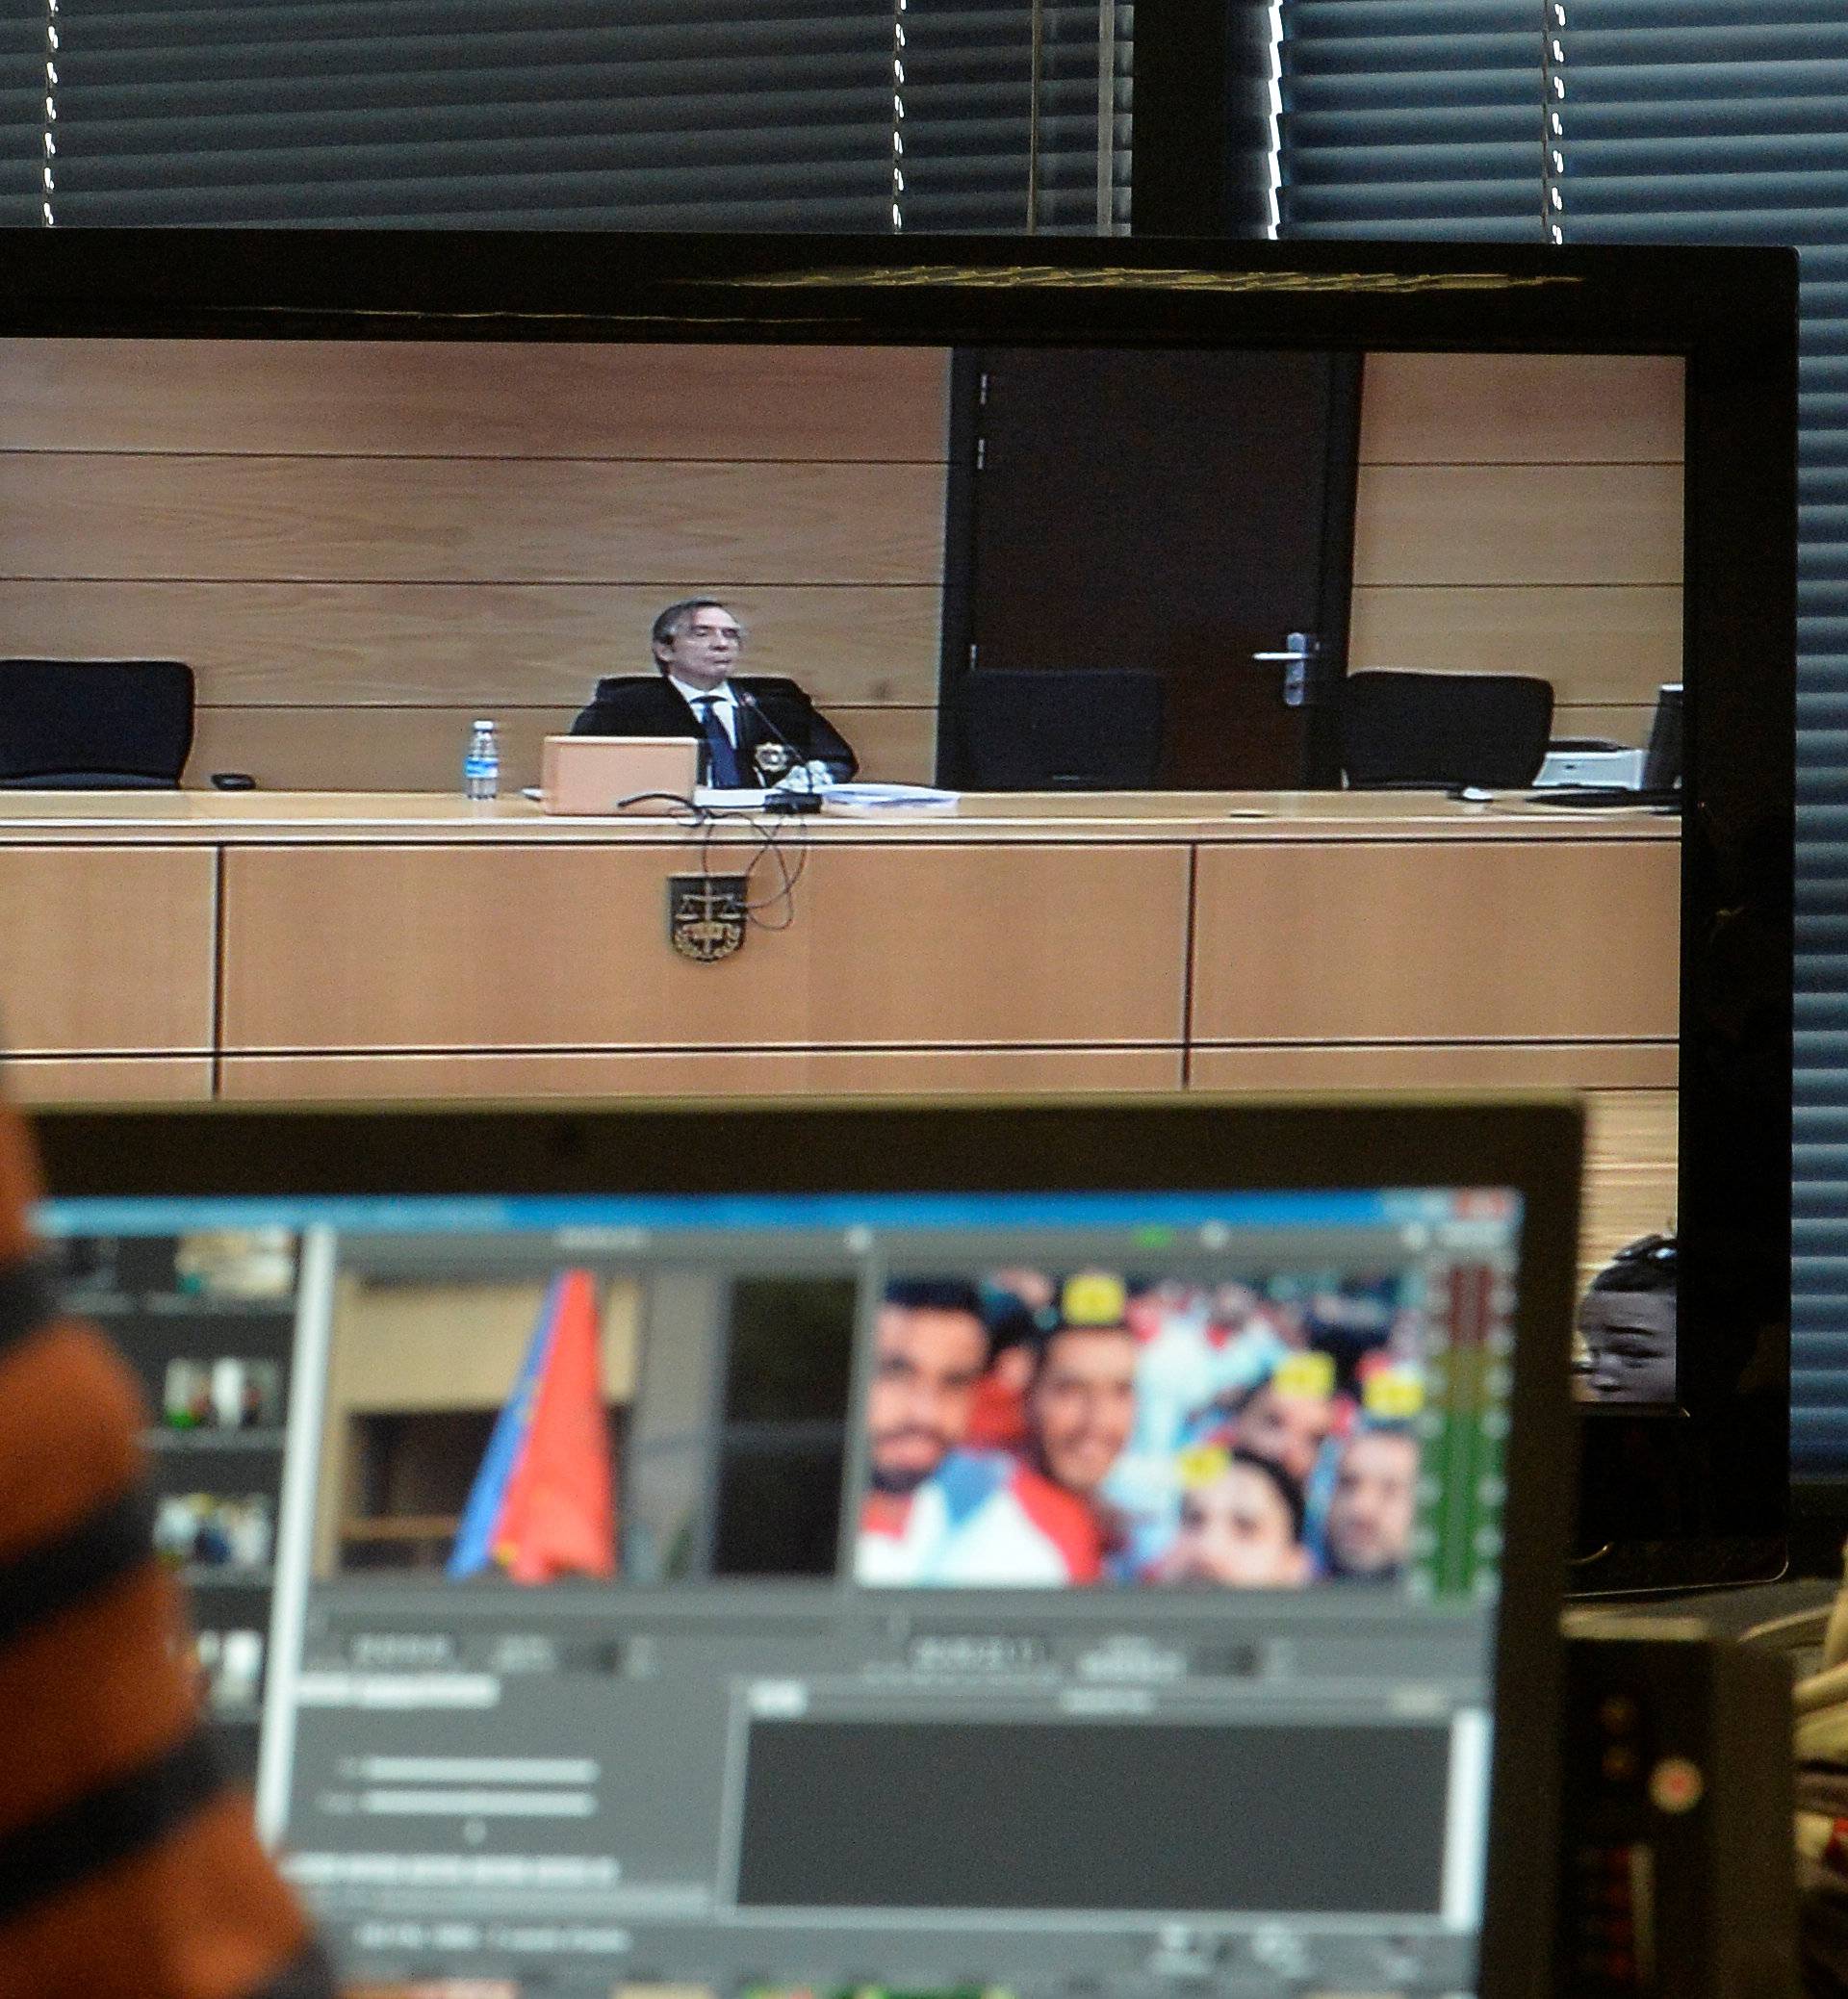 Jose Francisco Cobo, magistrate from the High Court of Navarra, is seen on screen as he delivers a nine-year prison sentence on five men accused of the multiple rape of a woman during Pamplona's San Fermin festival in 2016, in Pamplona